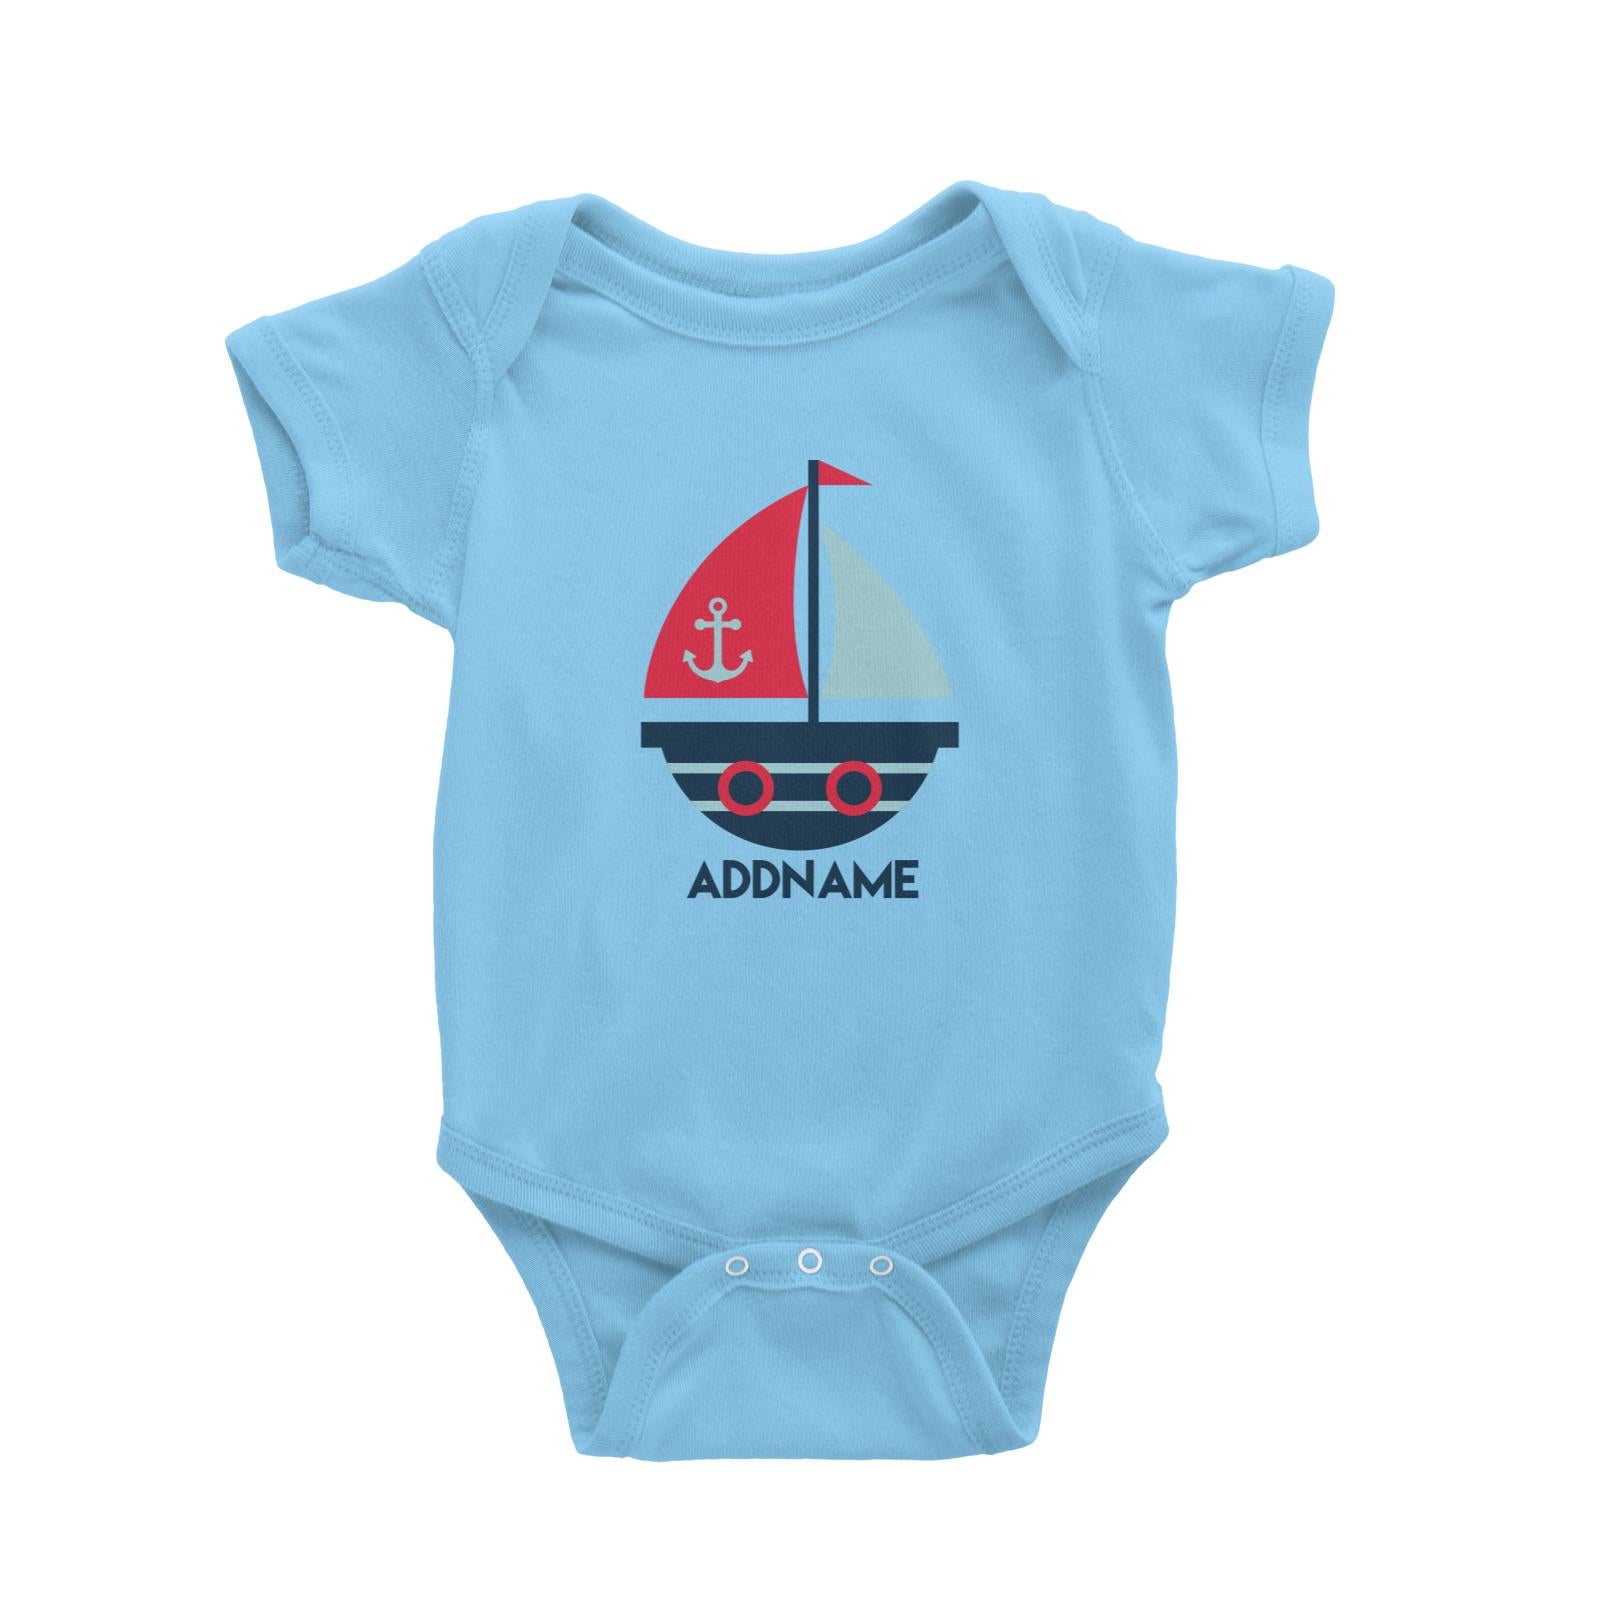 Sailor Boat Addname Baby Romper  Matching Family Personalizable Designs